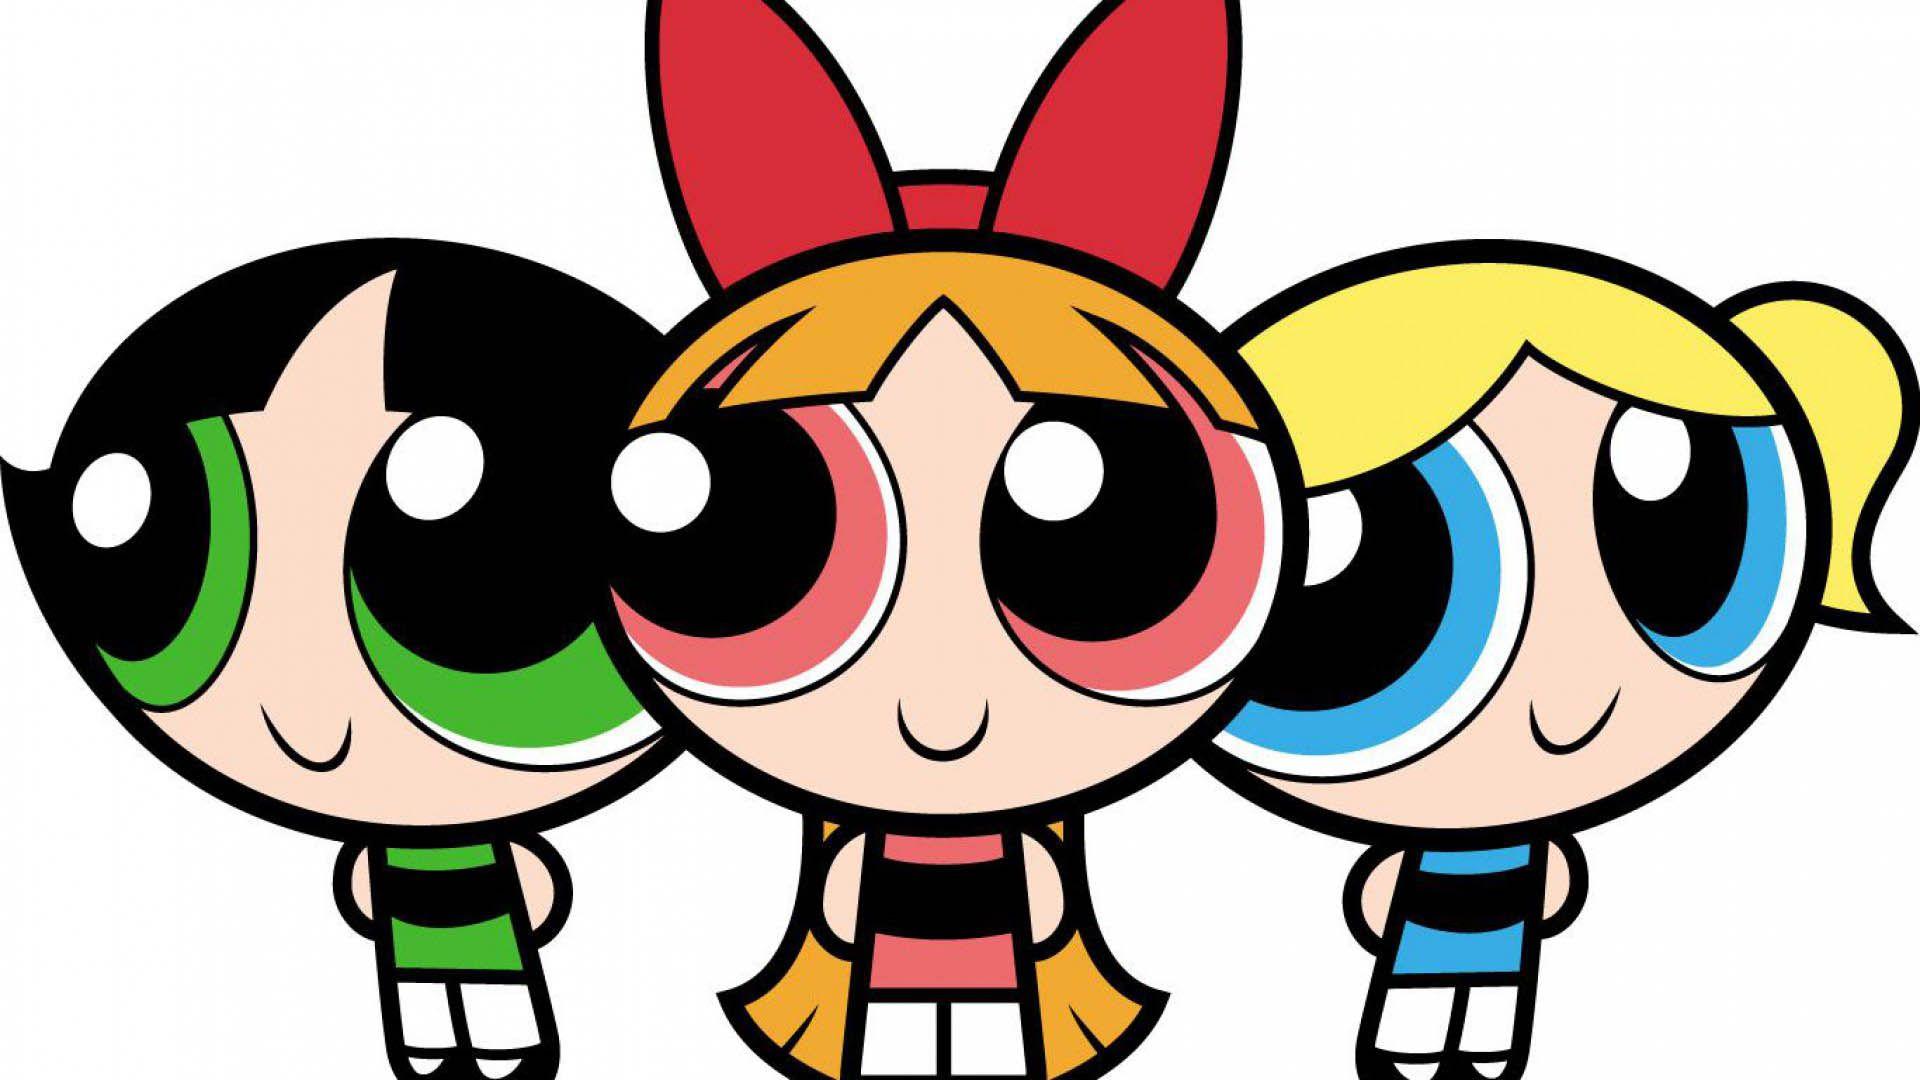 Powerpuff Girls is coming back Things that make me smile. HD